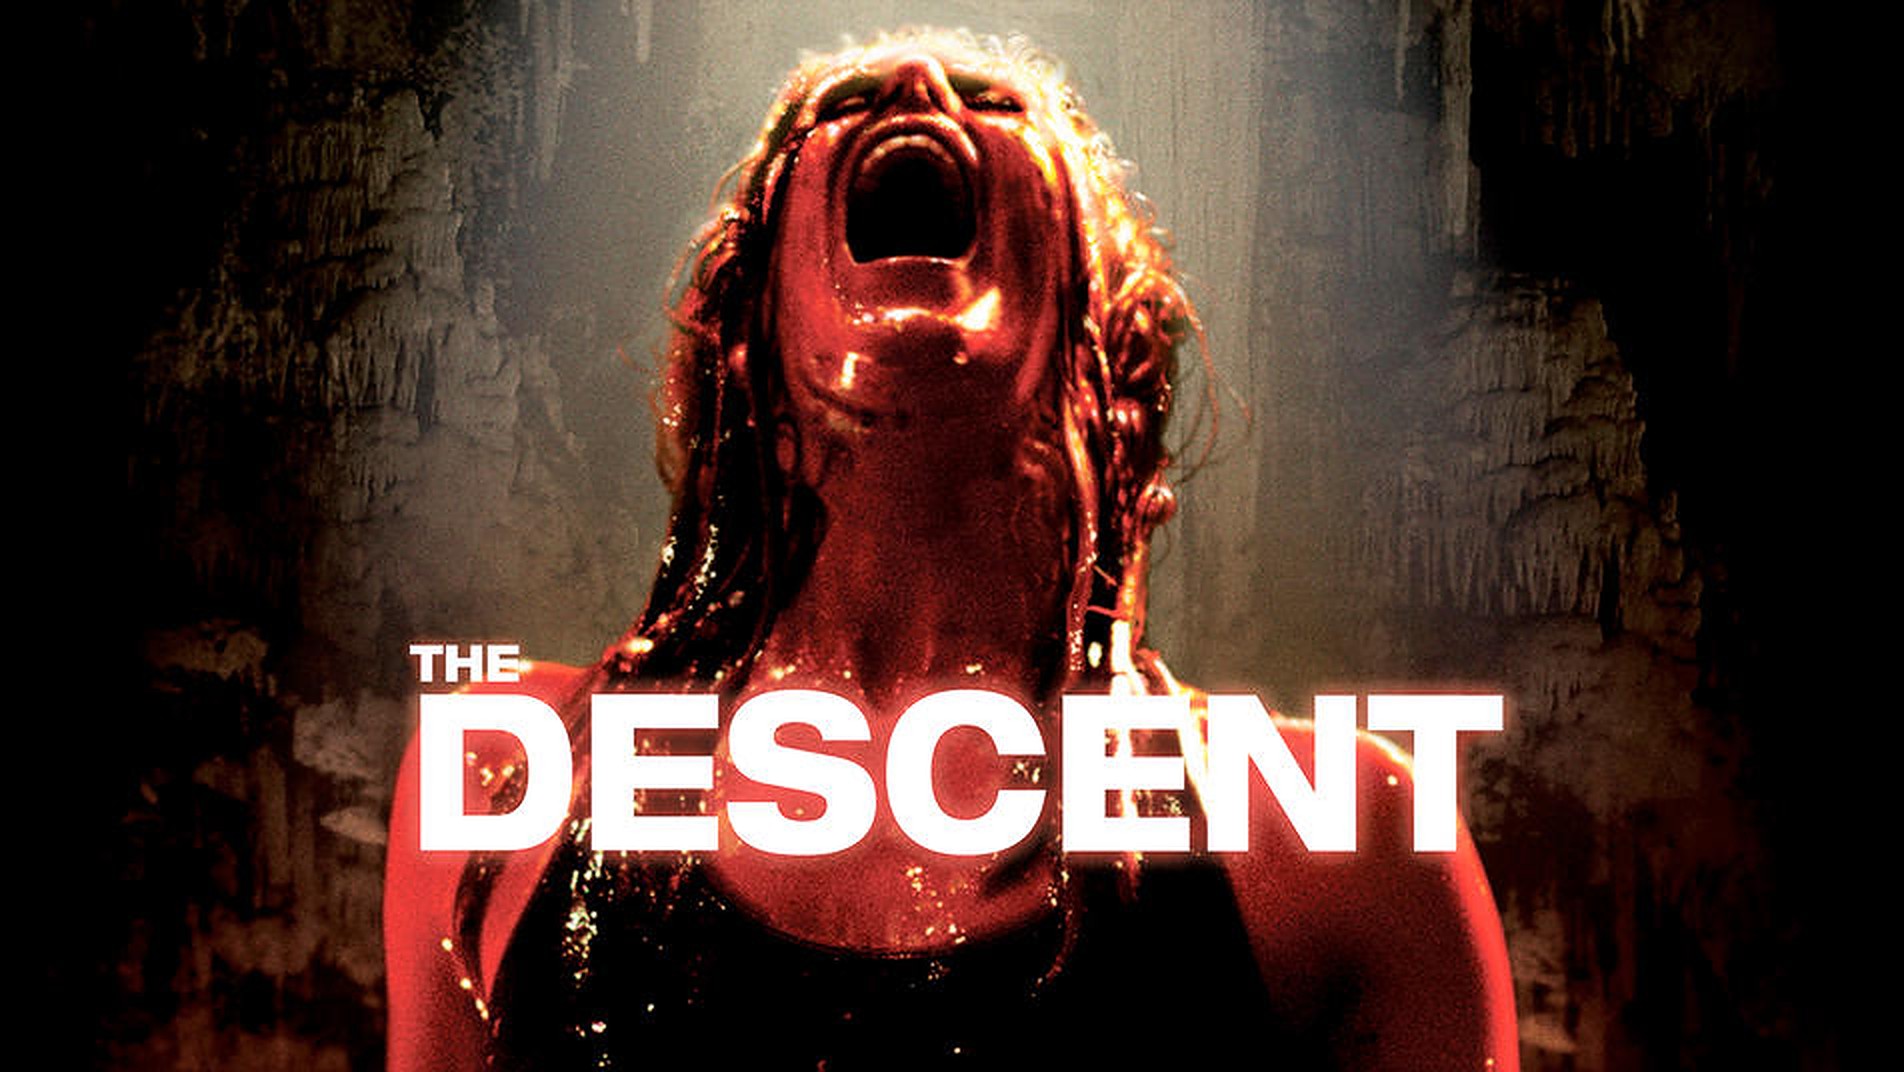 37-facts-about-the-movie-the-descent